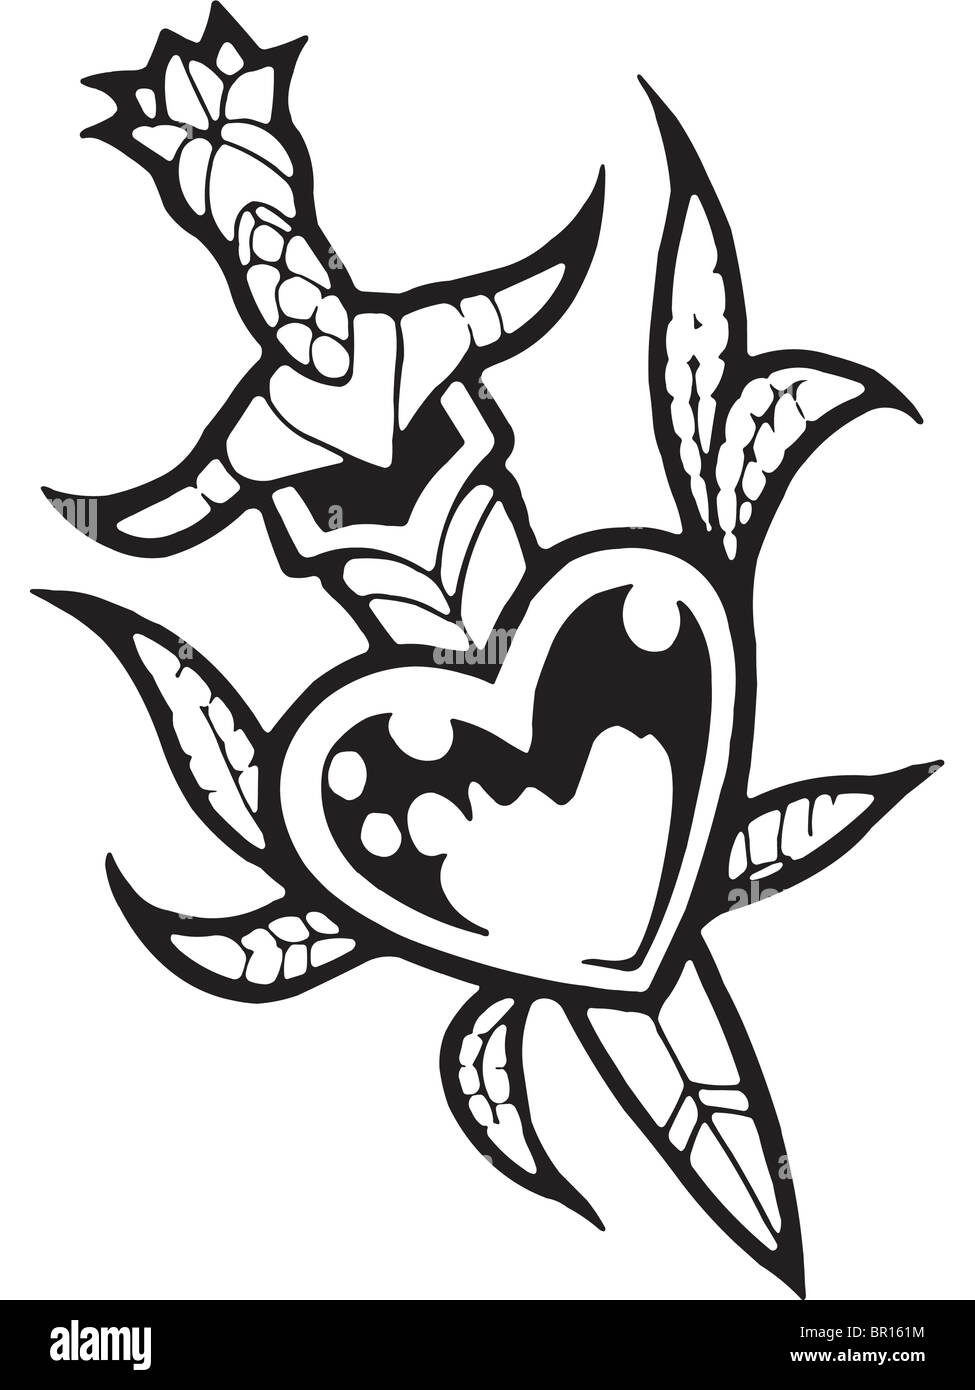 A black and white version of a stencil of a heart with a dagger through it Stock Photo